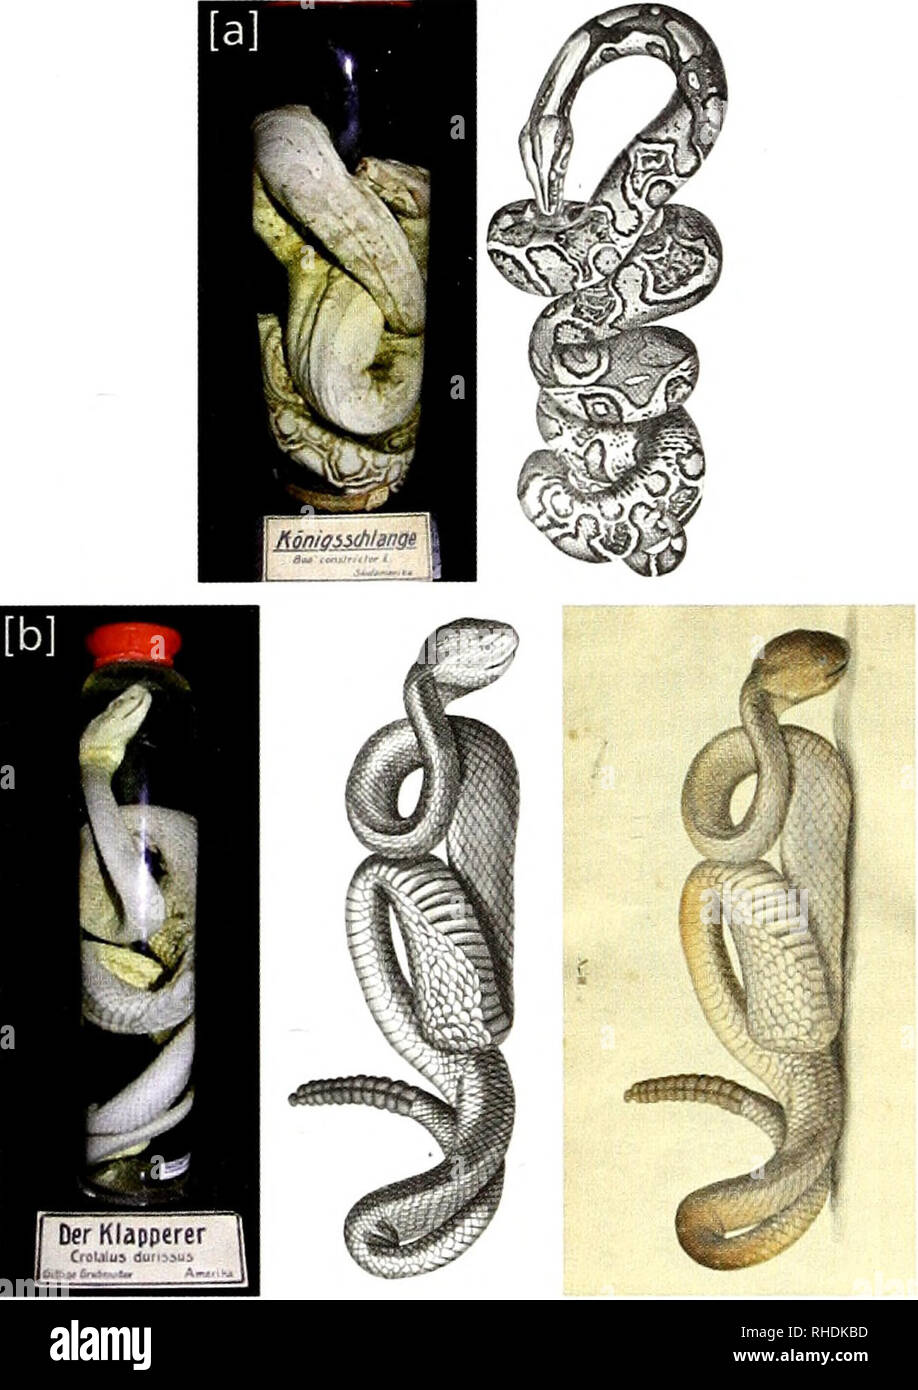 . Bonn zoological bulletin. Zoology. The Historic Linck Collection of Snai&lt;es 235. Plate 7. a. Match of (left) Boa constrictor (I2OI3A3) to (night) Scheuchzer (1735) plate 746, figure 1. Photos: A. M. Bauer, b. Match of (left) Cwtalus dwissus (12085A3) to (center) Scheuchzer (1735) plate 738, figure 4, and (right) Icones XLI- II. Left and center images: A. M. Bauer. Right image courtesy of Universitatsbibliothek Leipzig. itself pre-Linnaean and did not use binominal nomencla- ture. Selected images of Linck's snakes were subsequent- ly cited by Linneaus (1758, 1766), Laurenti (1768), Gmelin  Stock Photo